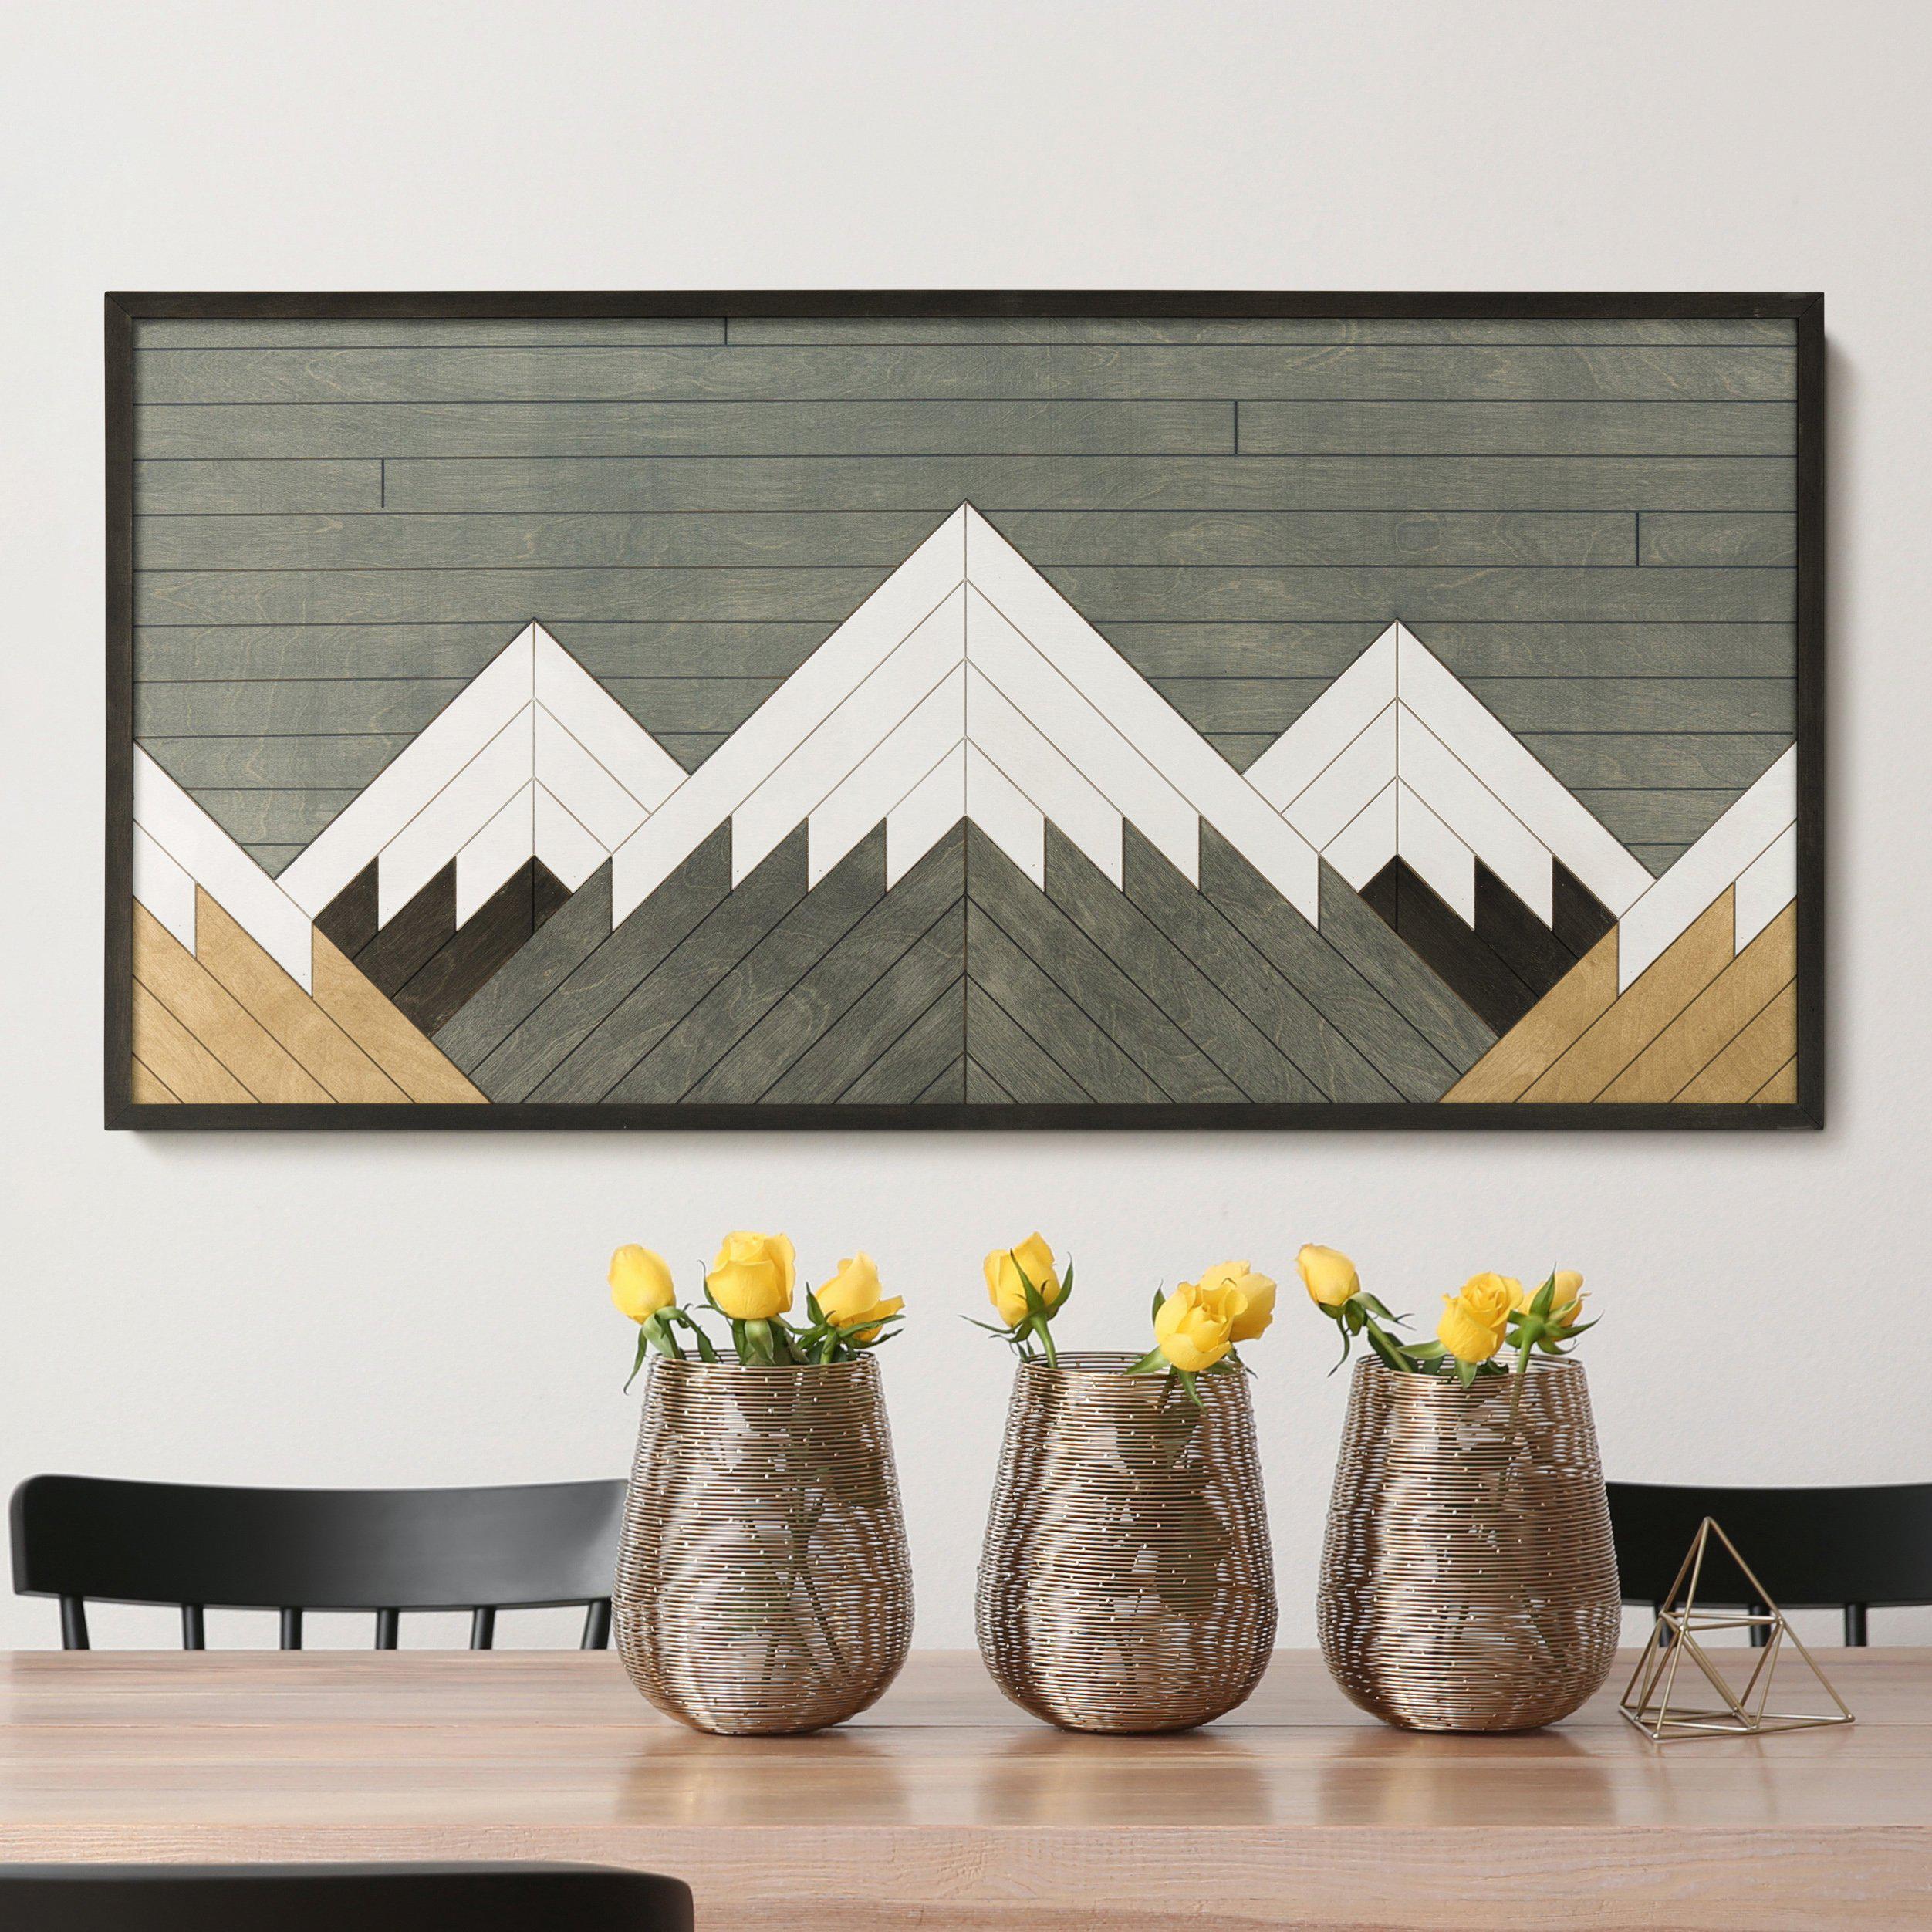 Famyfamy Mountain Wood Wall Art 15.74 * 6.29in Rustic Geometric Barn Design  White Wood Frame Ready to Hang Modern Artwork for Living Room or Bedroom  Home Decor - Walmart.com